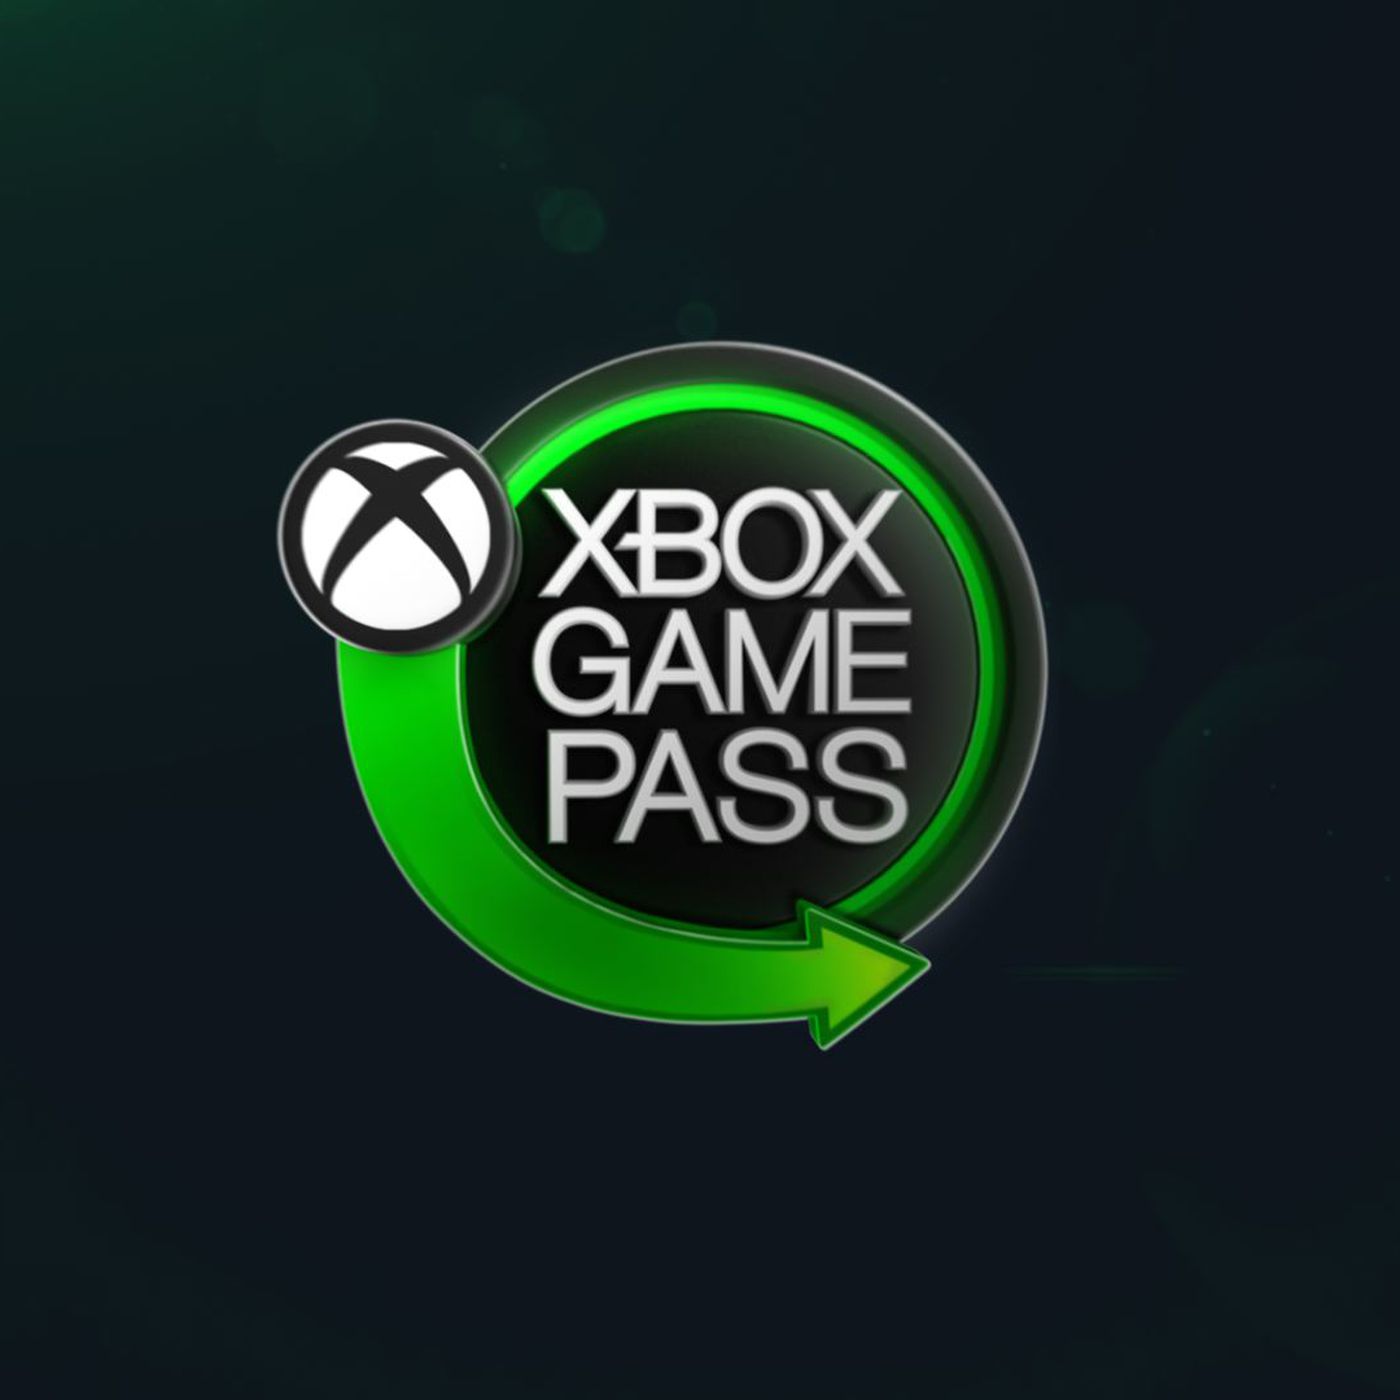 Xbox Game Pass Counts 10 New Games in Big Day for Subscribers